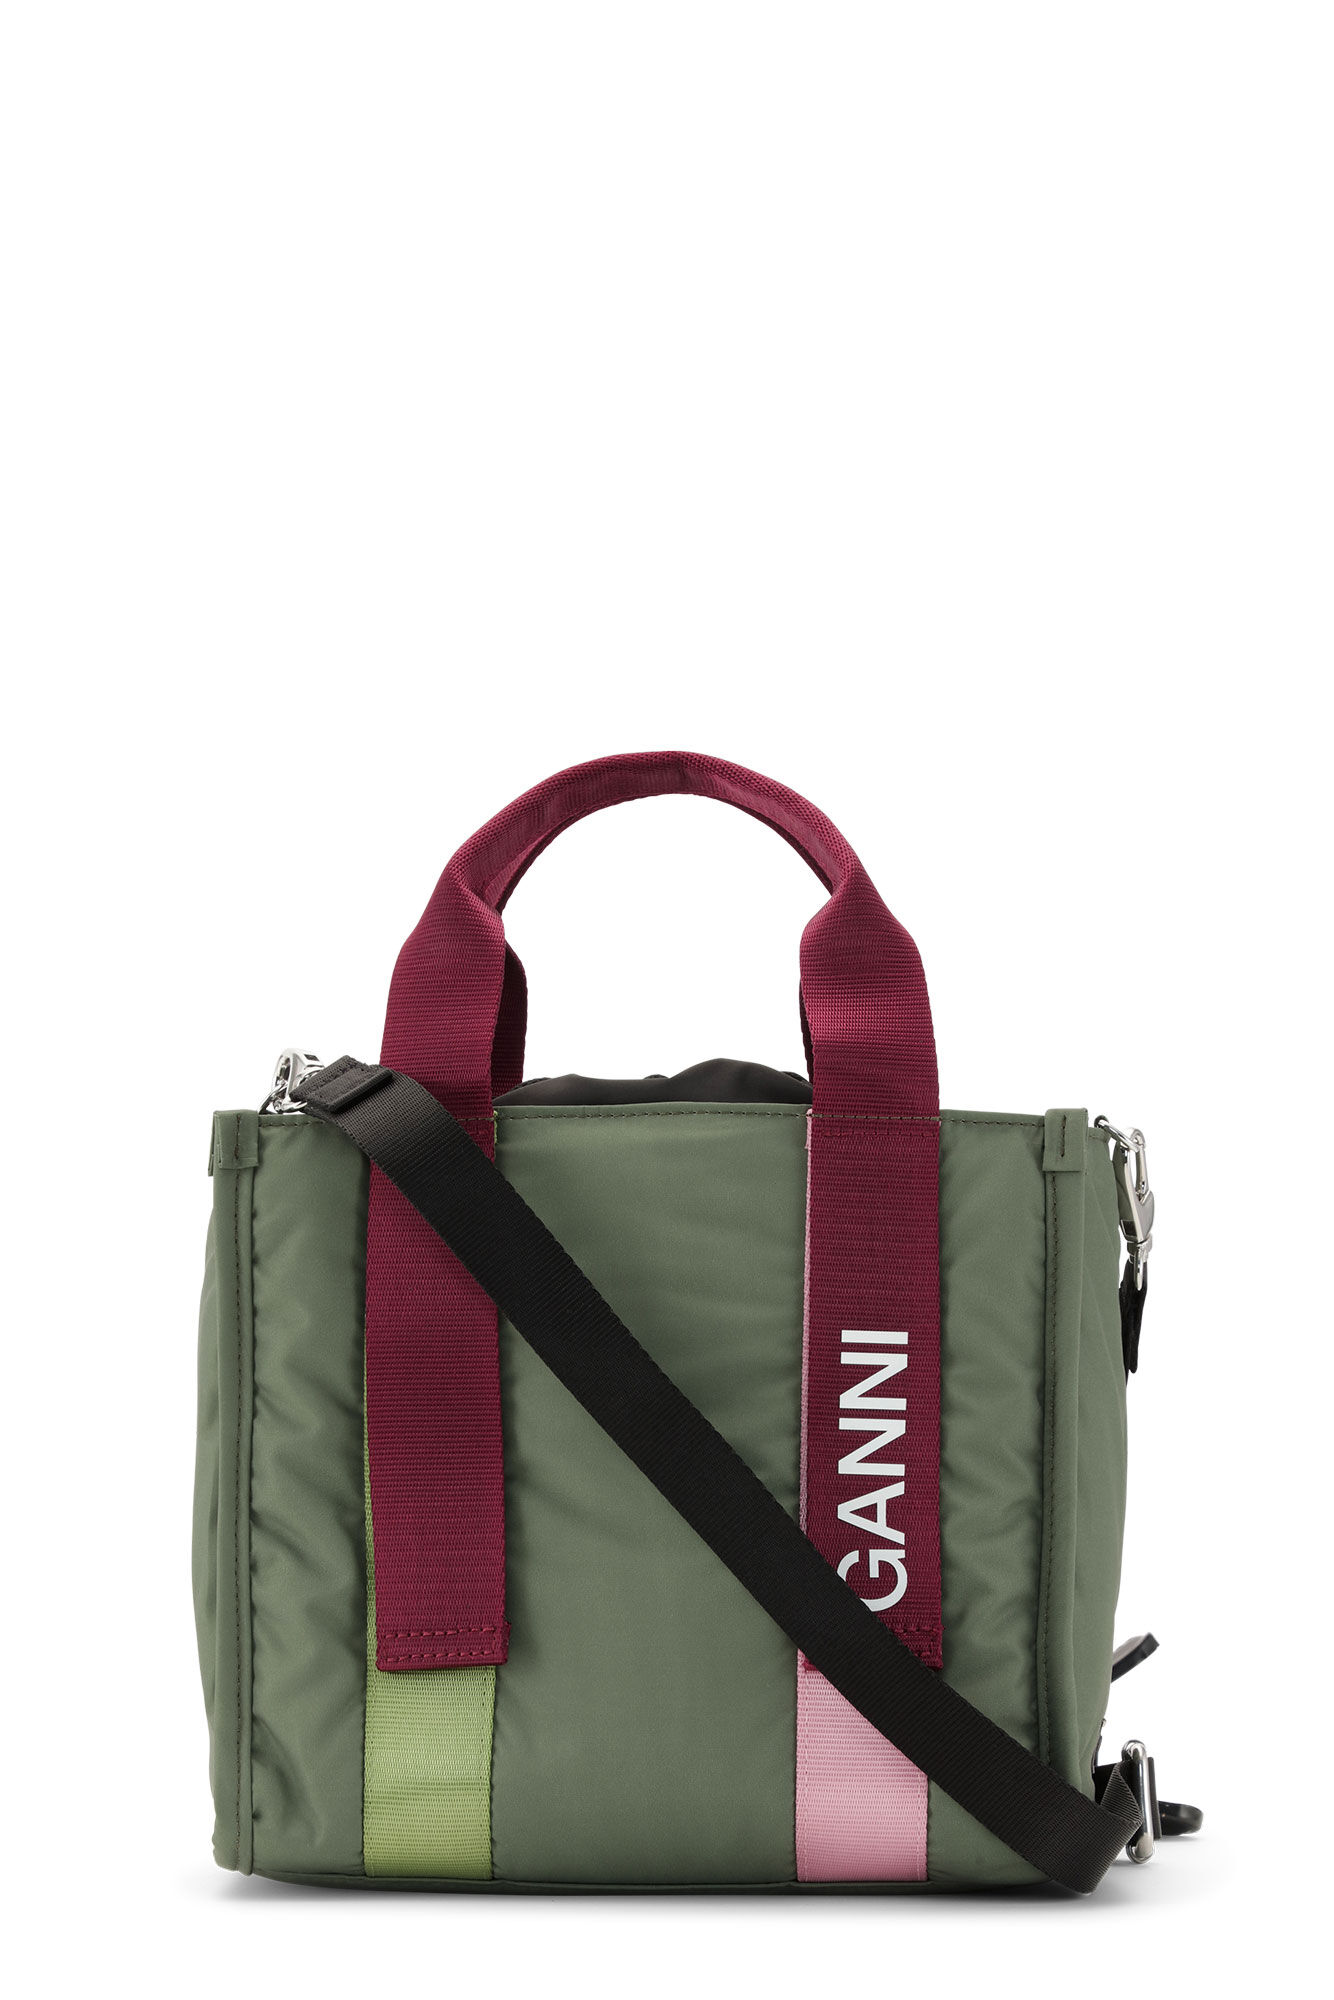 Ganni Small Recycled Polyester Tote in Kalamata